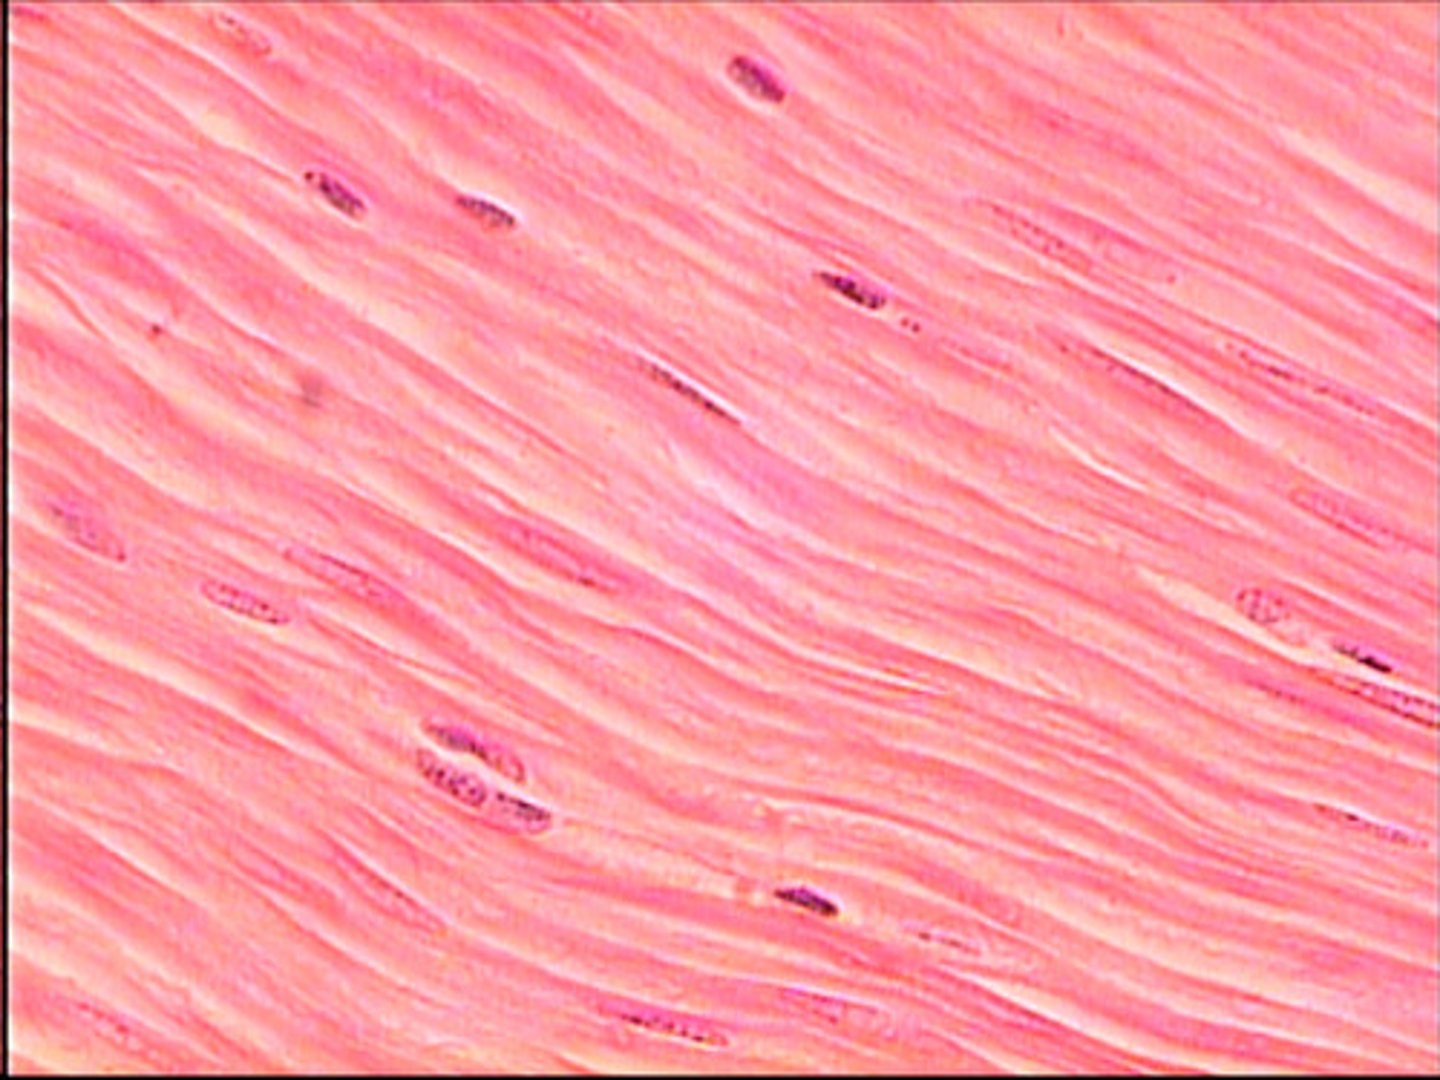 <p>- cells are spindle shaped with central nuclei</p><p>- no striations</p><p>- cells are arranged closely to form sheet</p><p>- moderate regeneration</p>